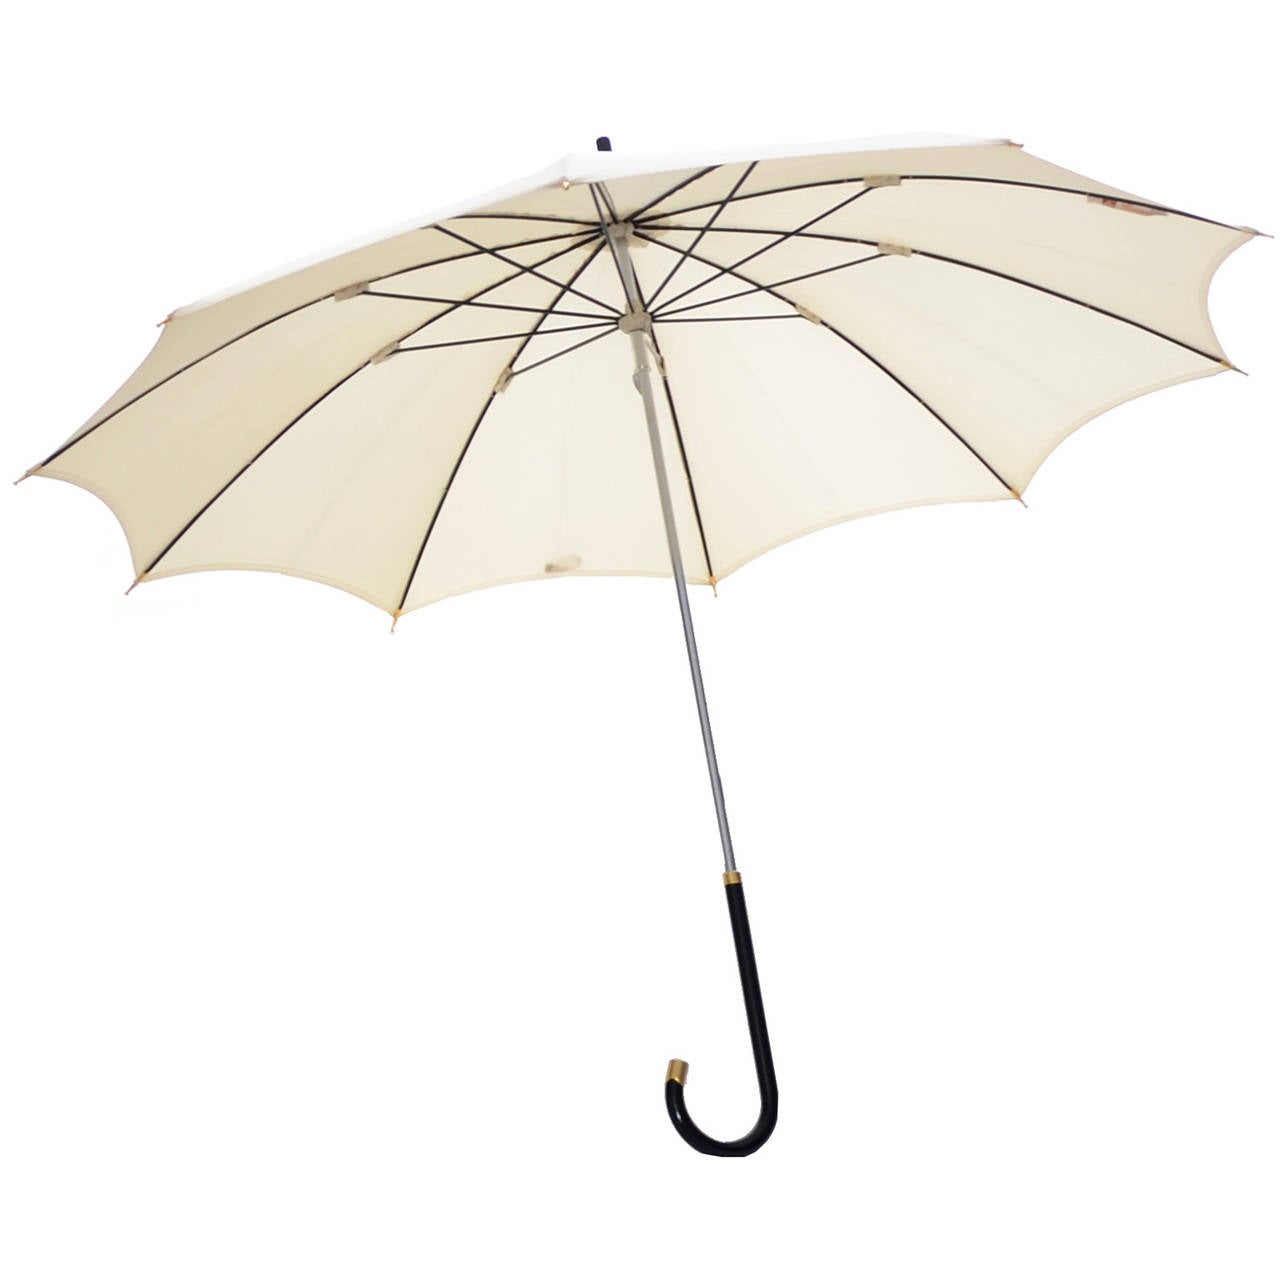 This is one of several vintage Gucci umbrellas I acquired from an estate I purchased that had an outstanding collection of designer clothing and accessories. This umbrella is ivory and measures 33 inches wide and 27 inches long from the top of the